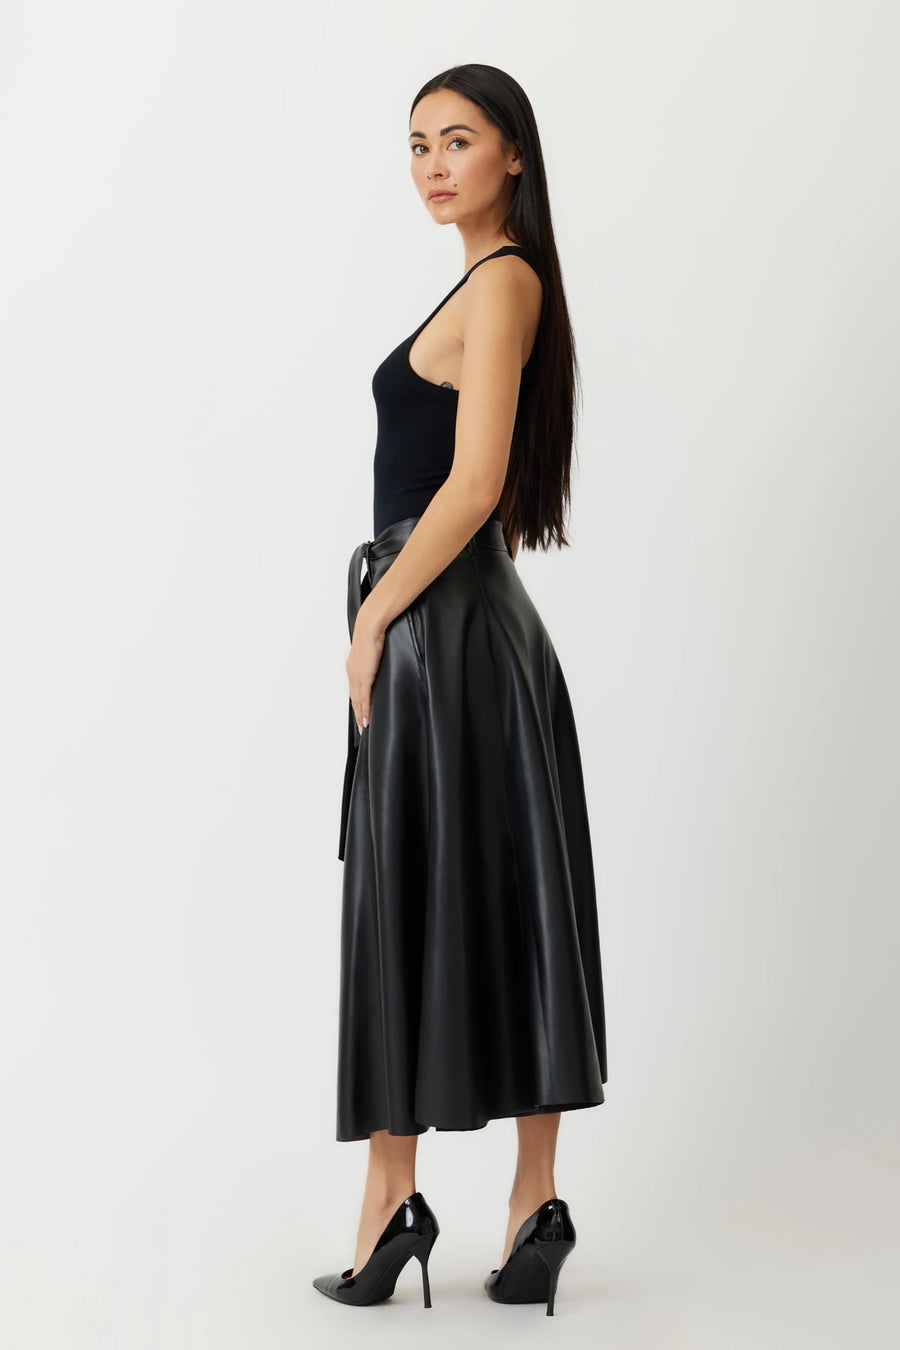 The Pembroke ethical leather maxi skirt in black by Greyven 